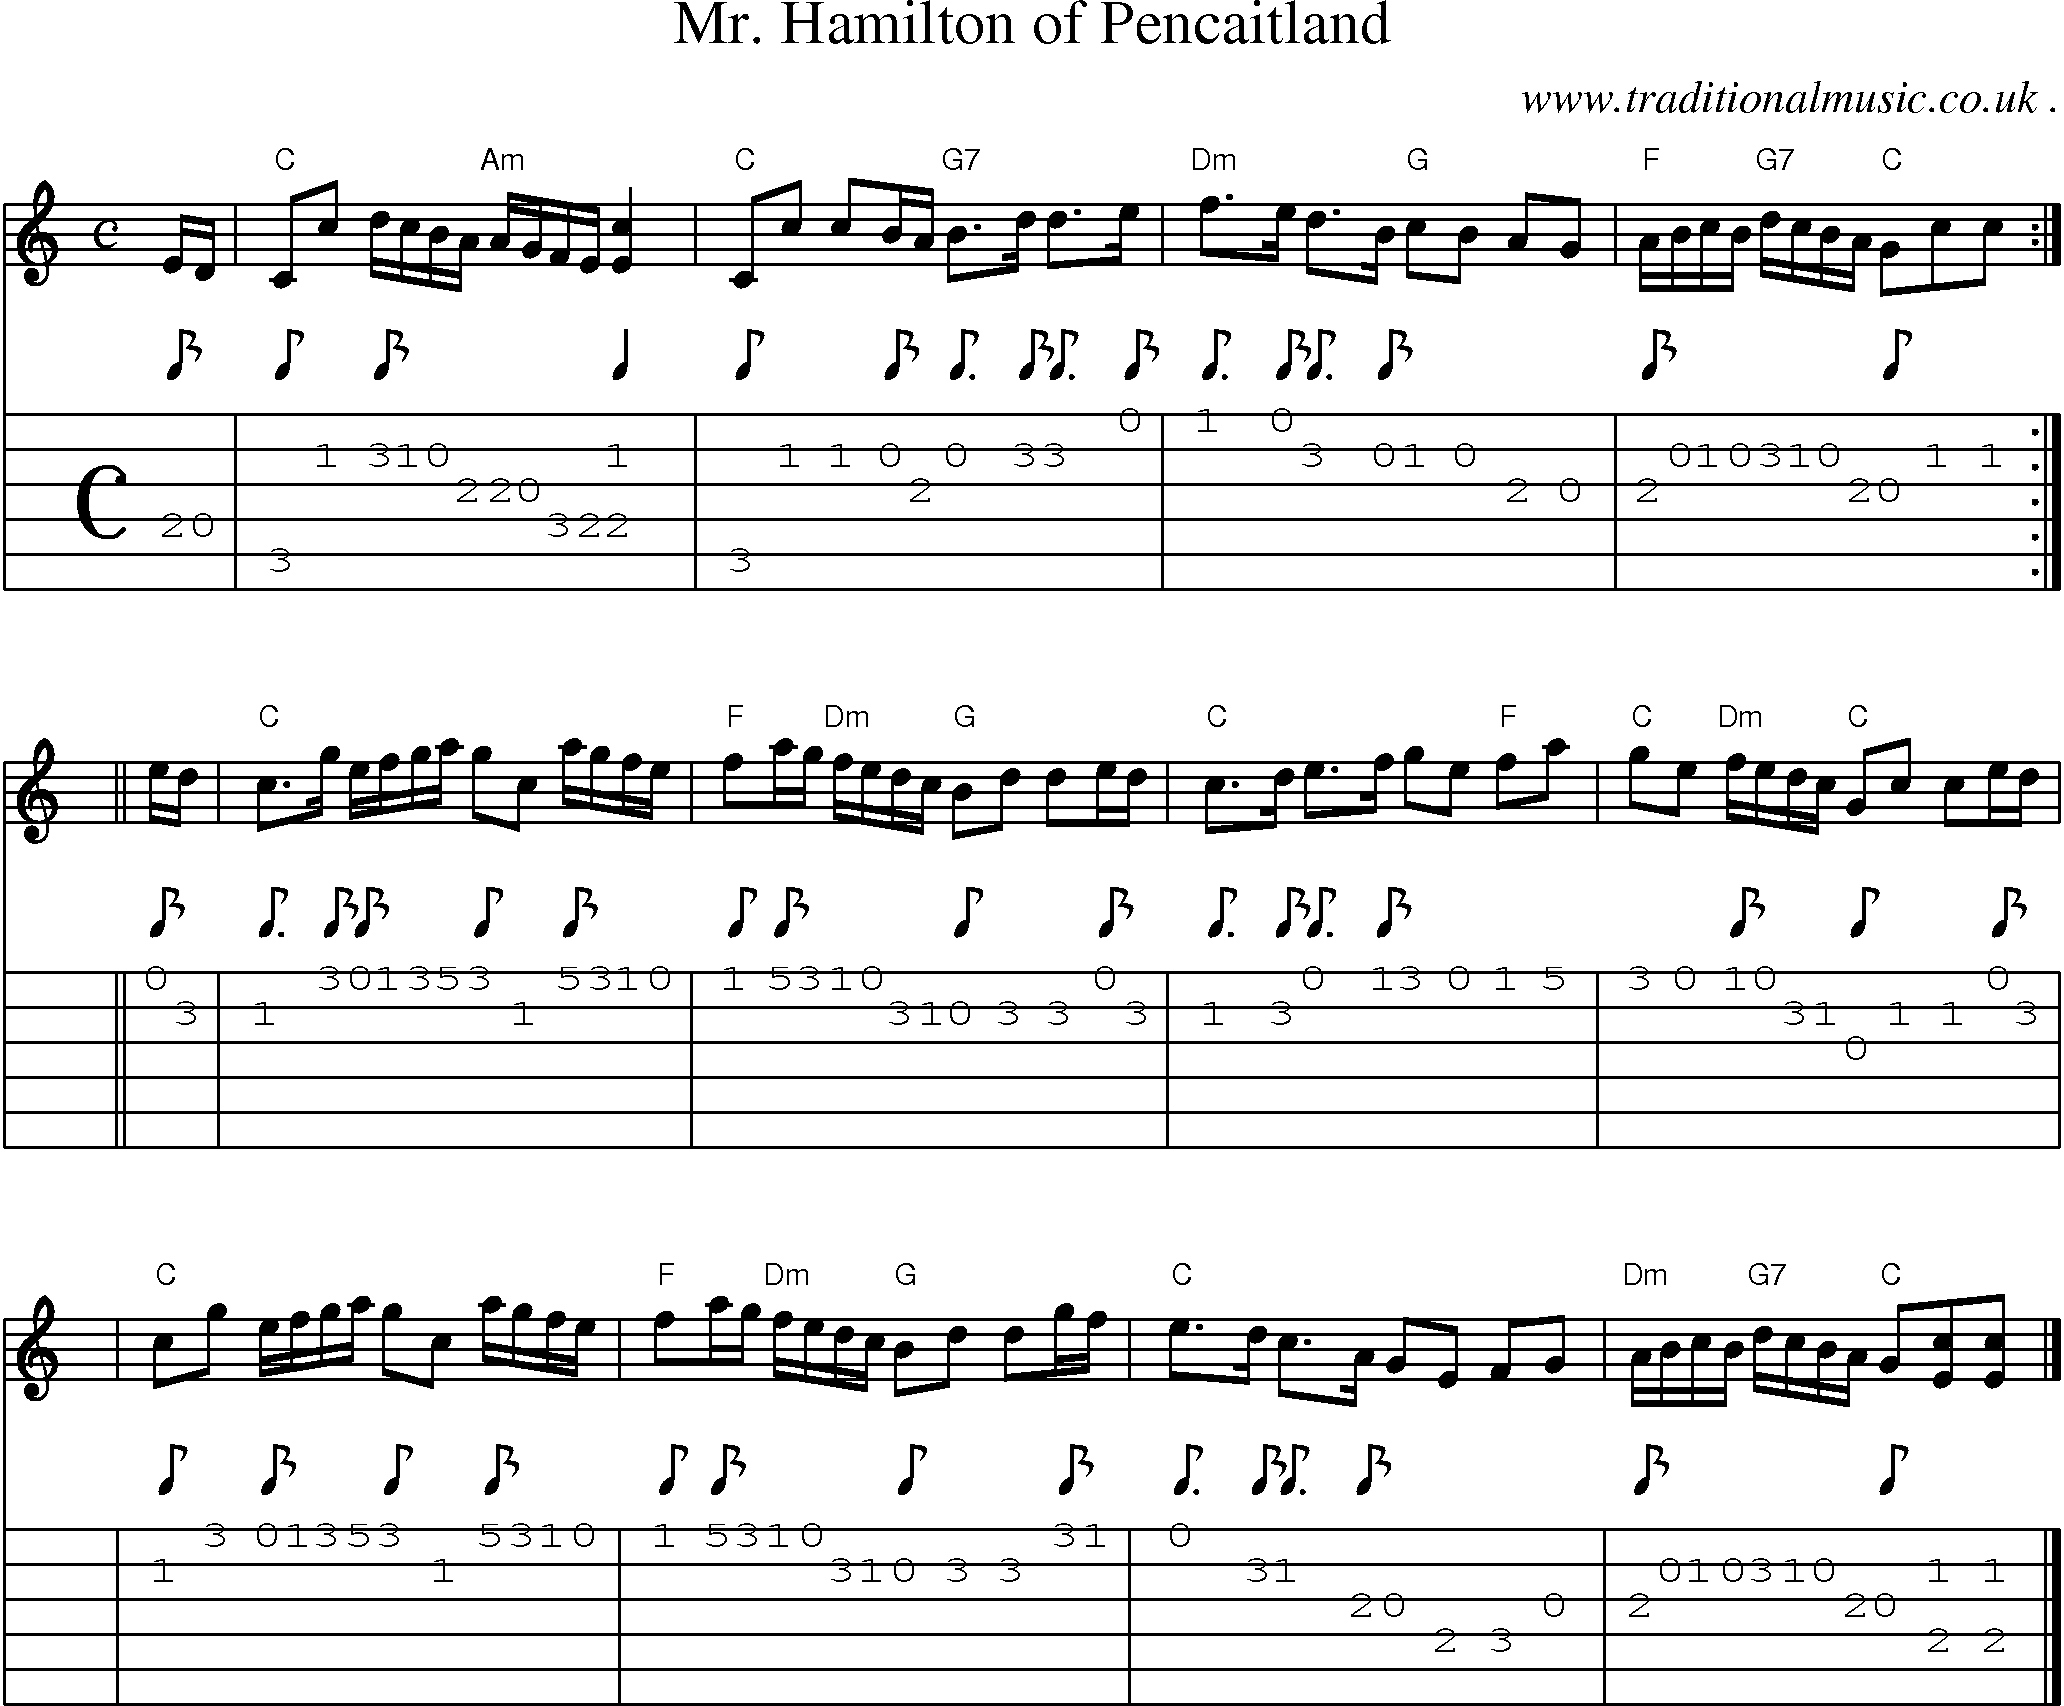 Sheet-music  score, Chords and Guitar Tabs for Mr Hamilton Of Pencaitland